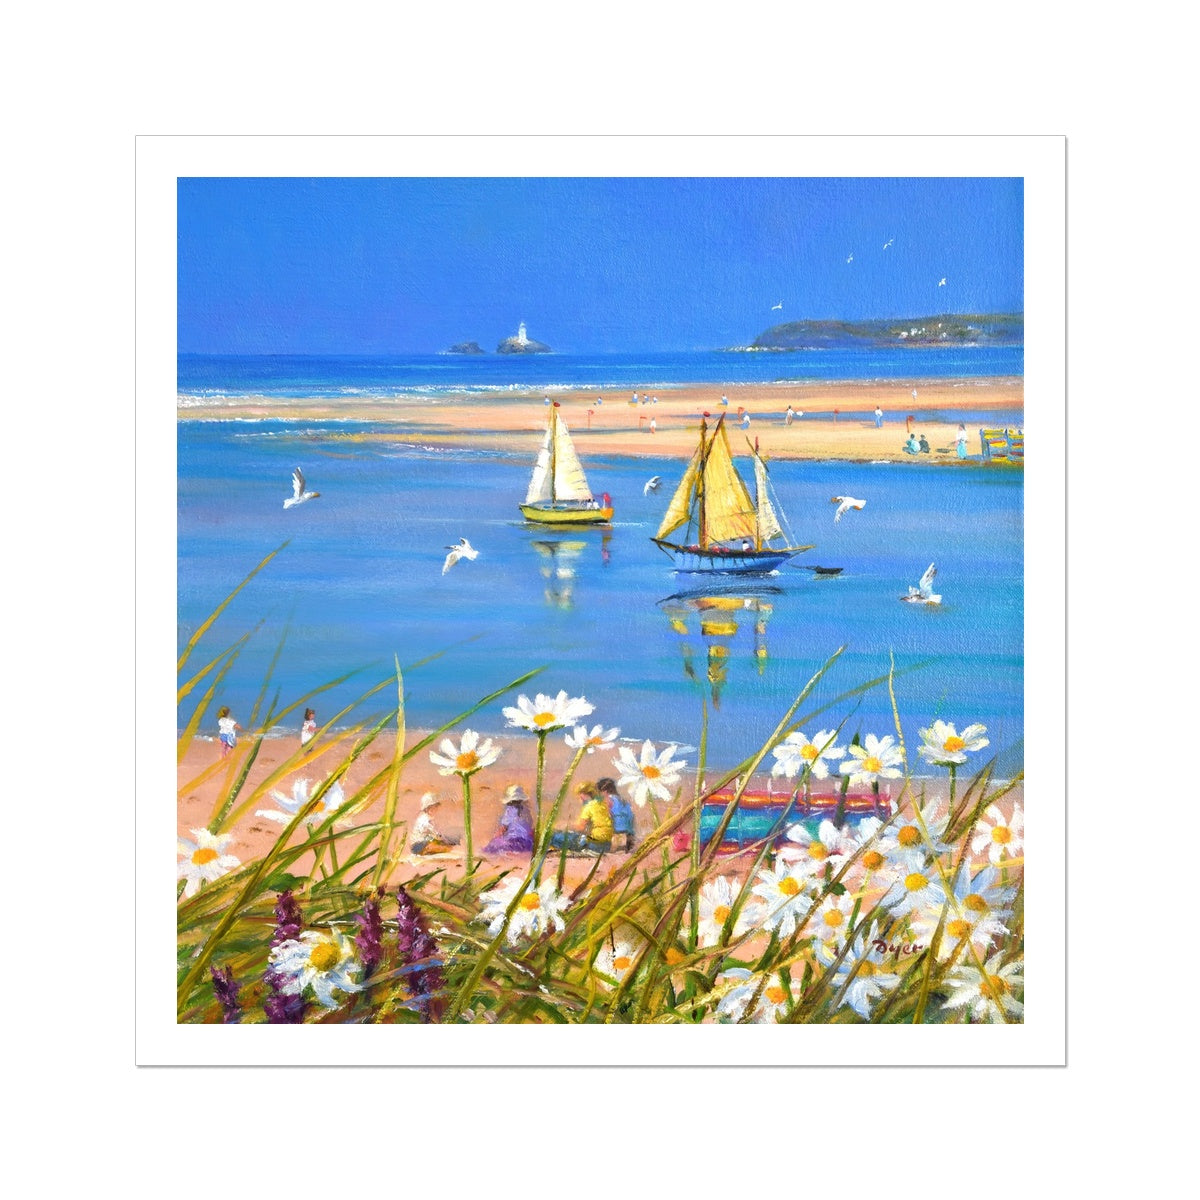 Ted Dyer Fine Art Print. Open Edition Cornish Art Print. 'Warmth of the Day, Hayle'. Cornwall Art Gallery